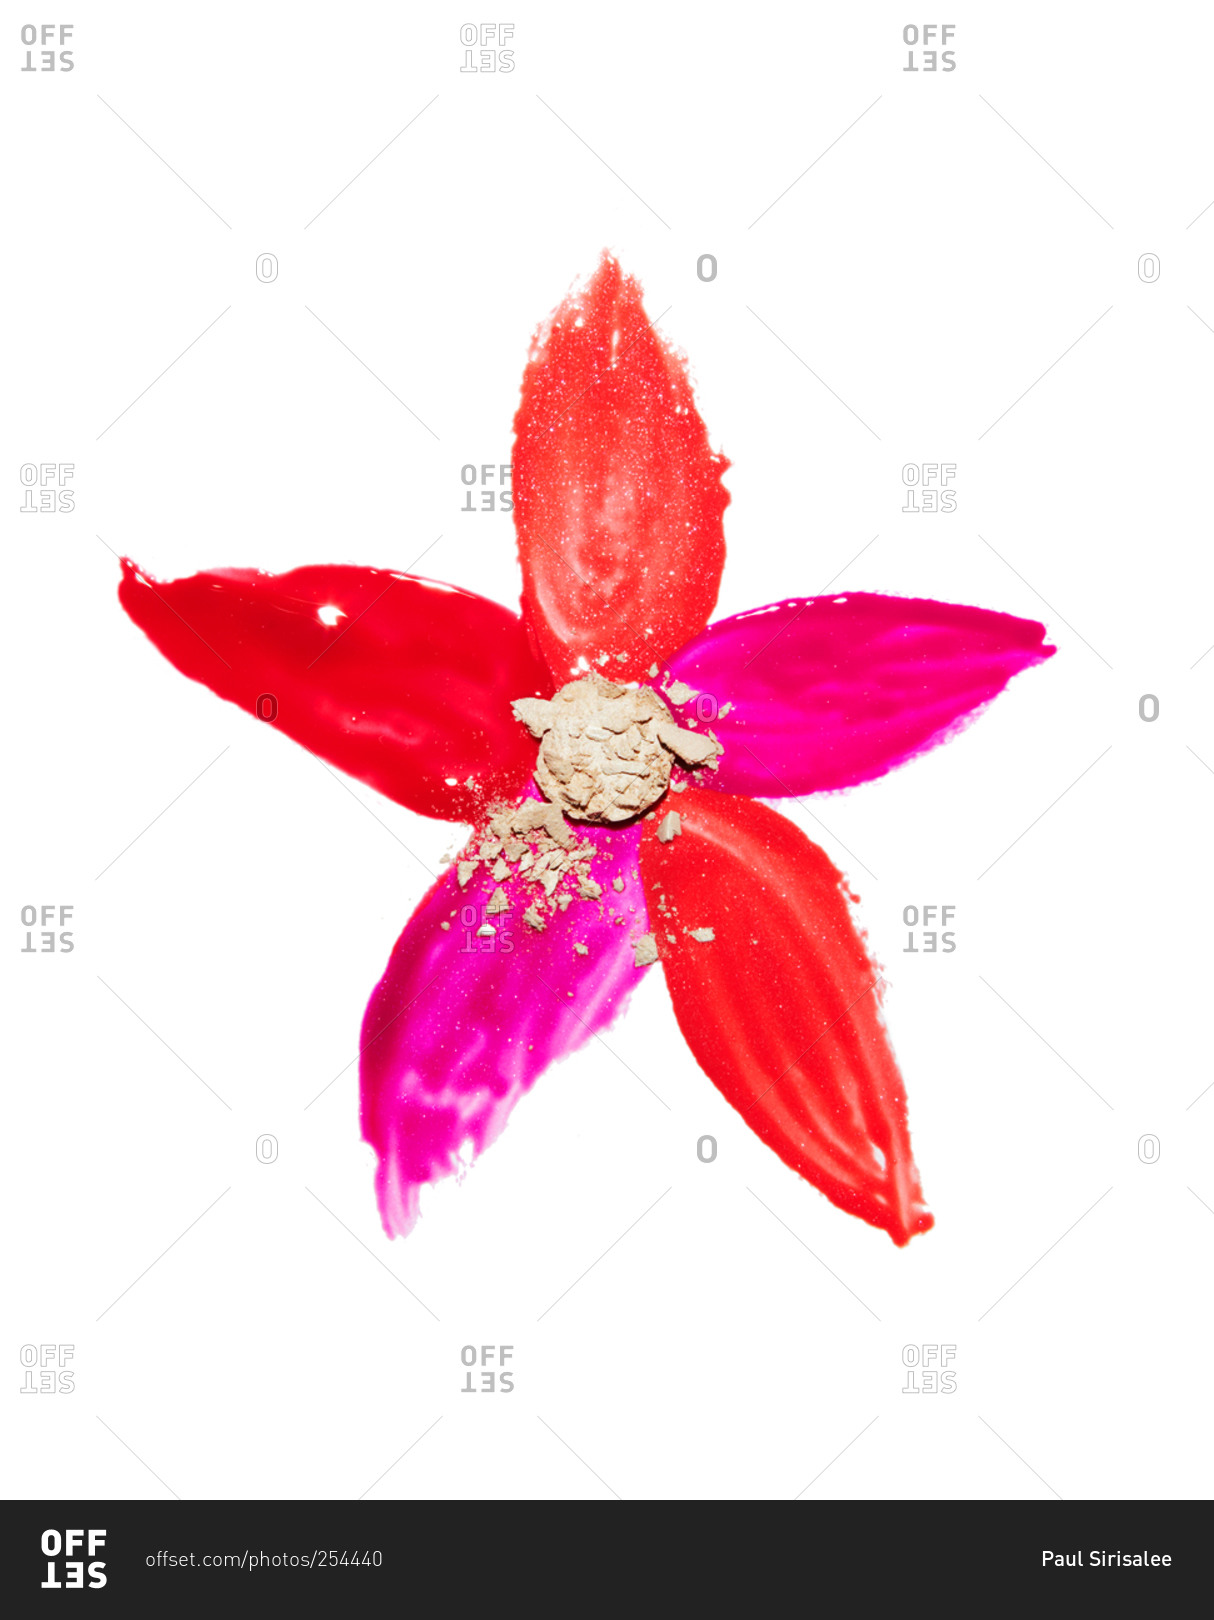 A flower made from lipstick streaks stock photo - OFFSET